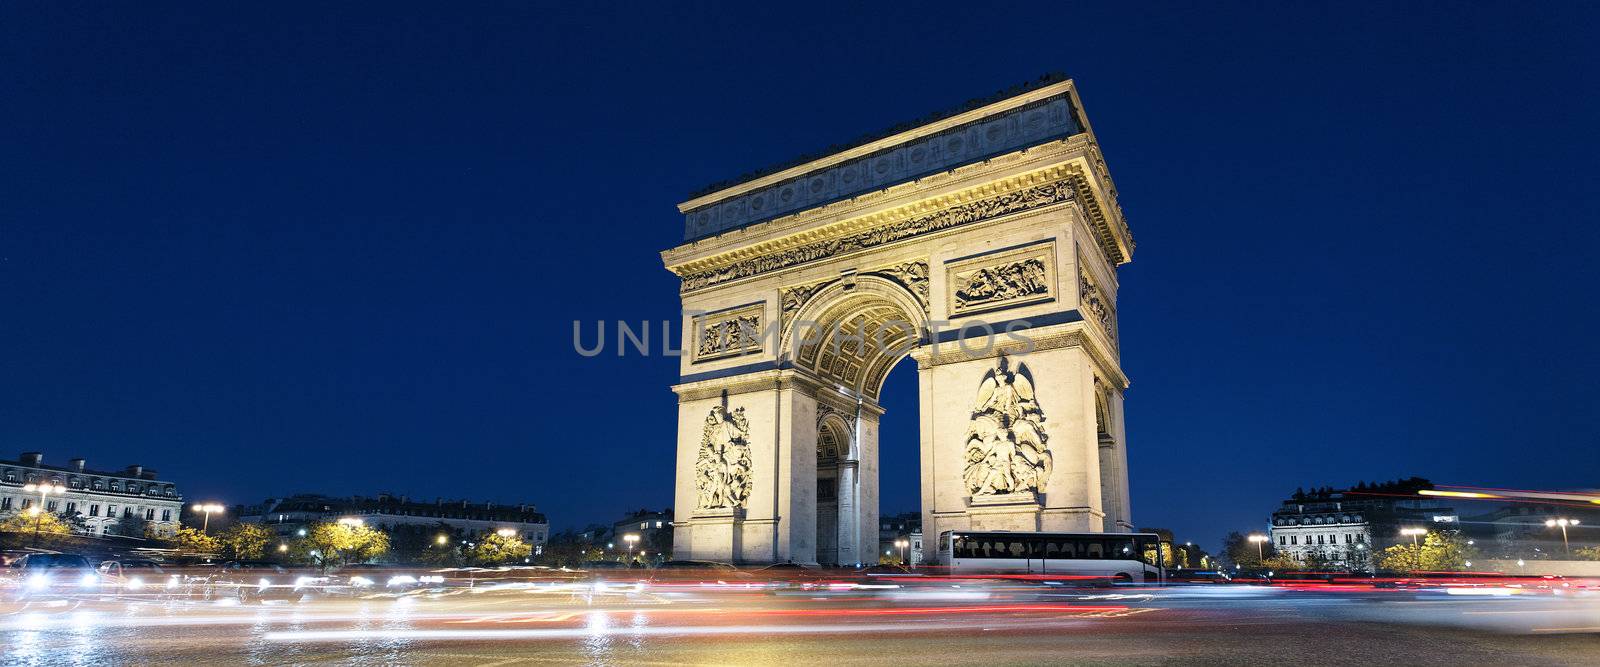 Panoramic view of Arc de Triomphe by night xith car lights